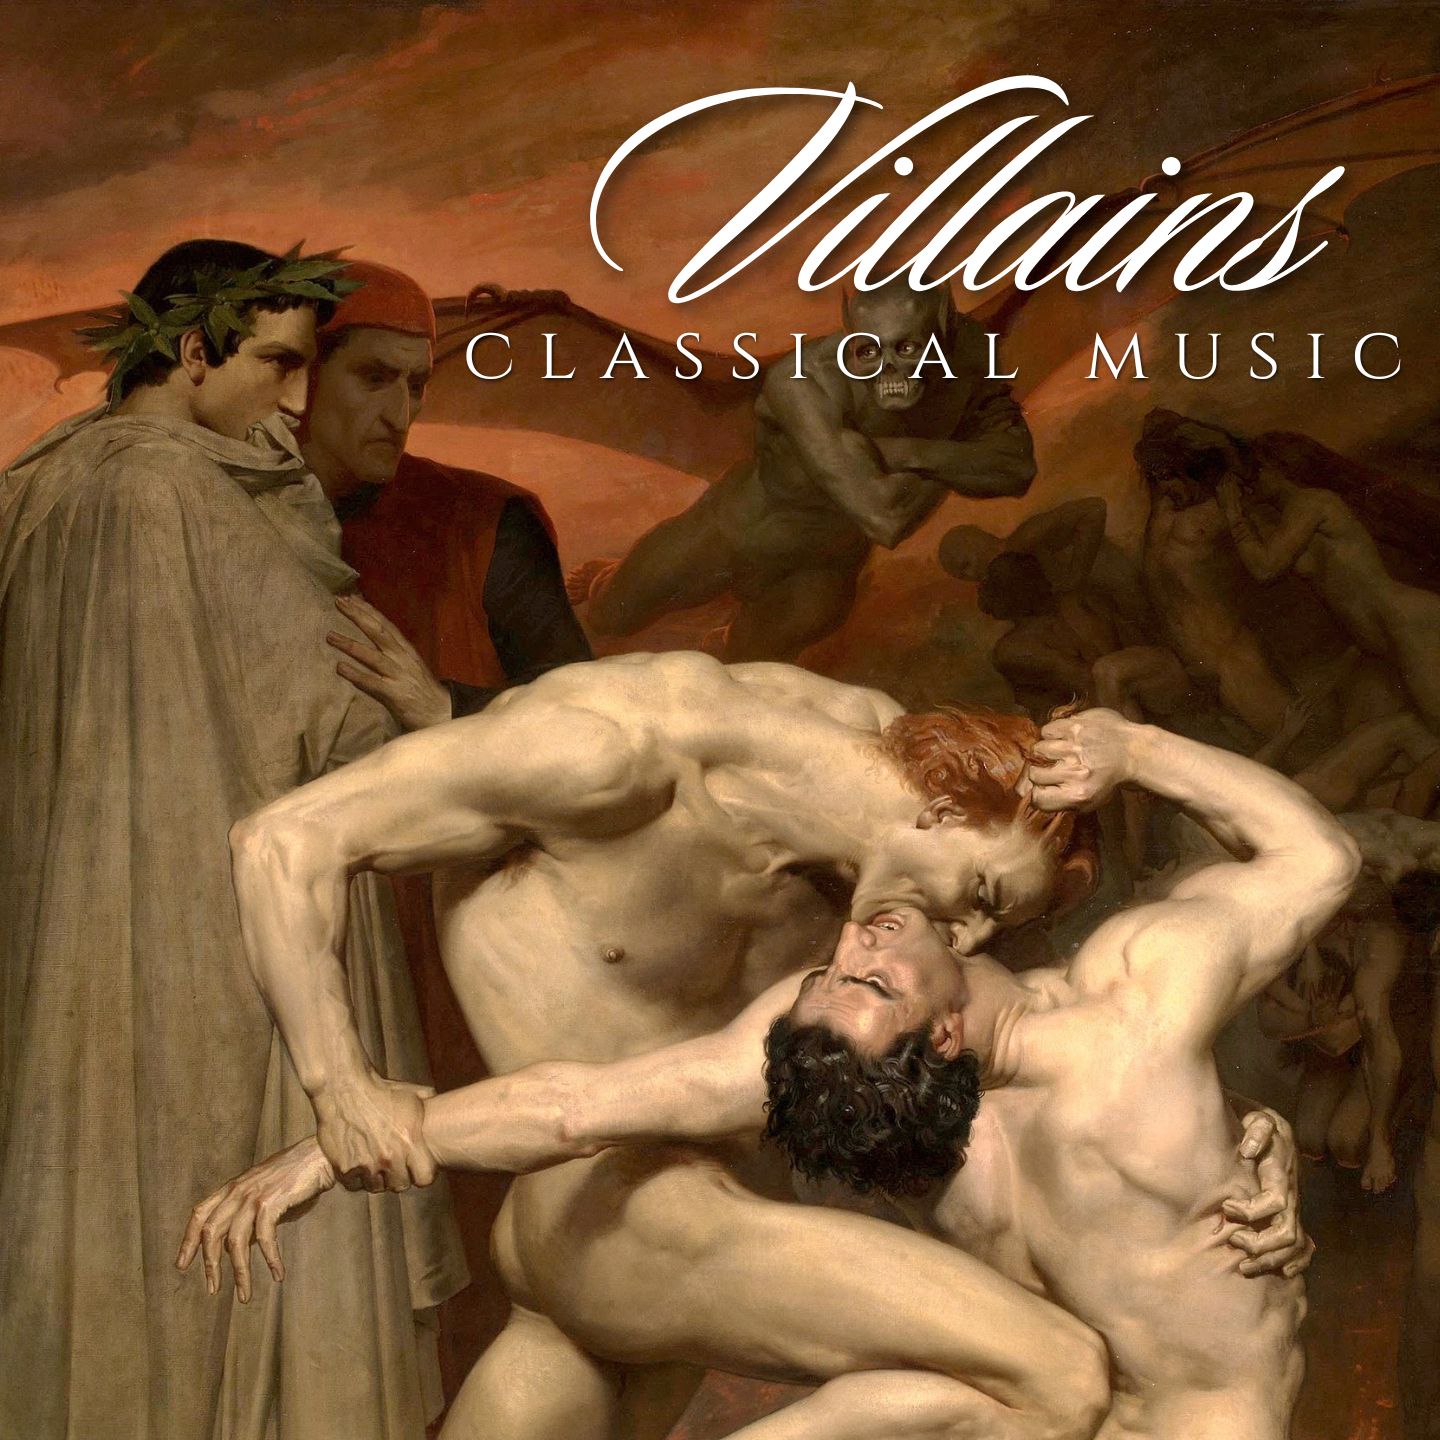 Classical Music for Villains